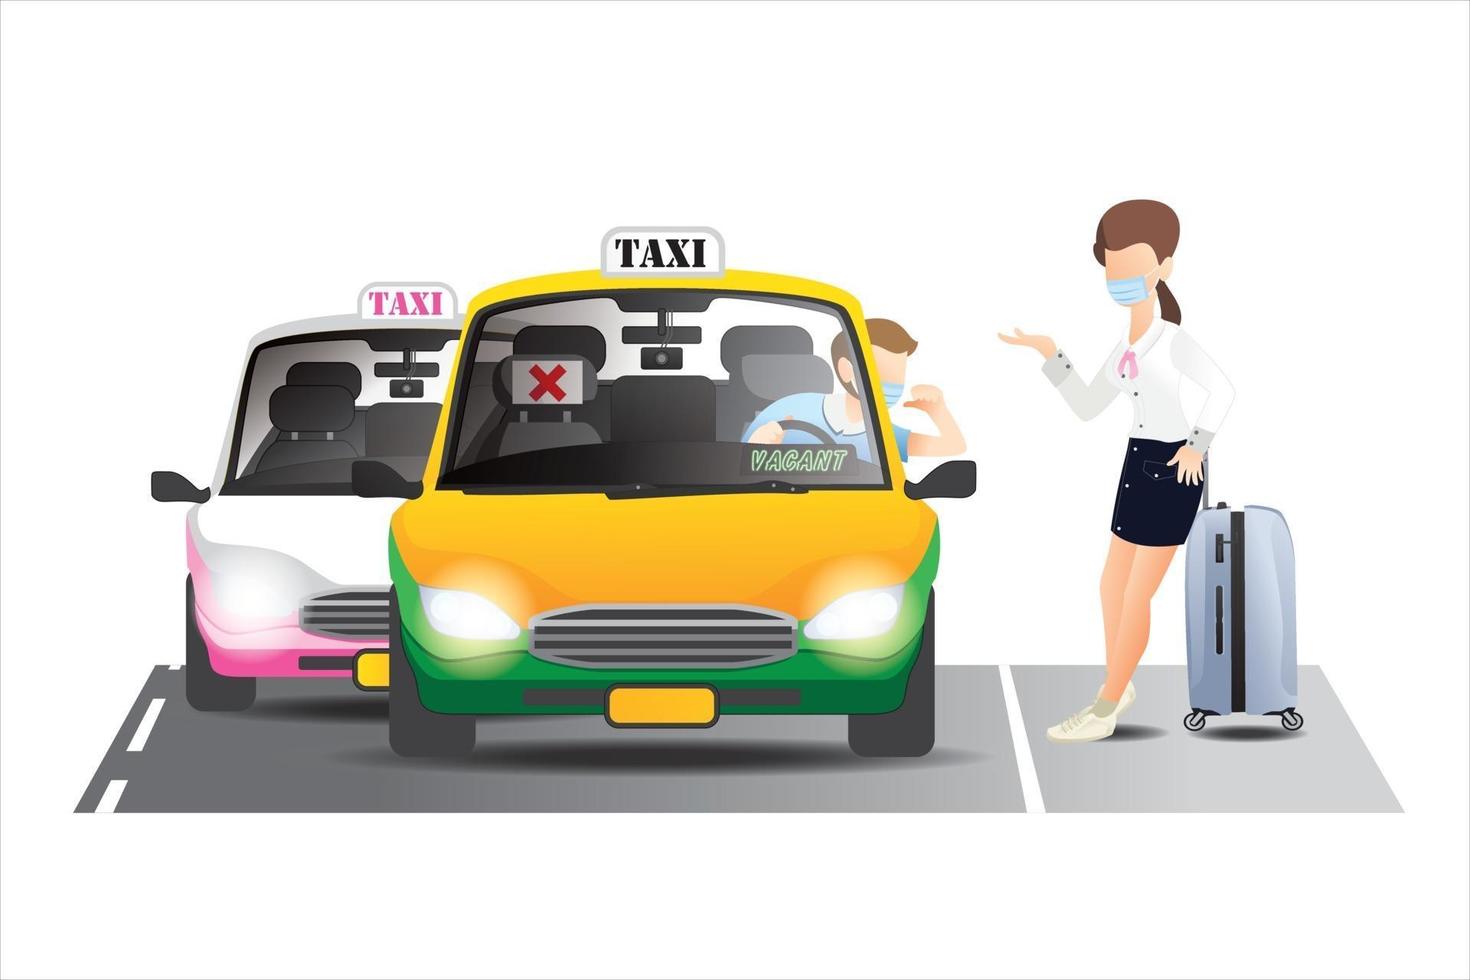 taxi driver warns the passenger about coronavirus, sit in the right position, cartoon vector illustration.